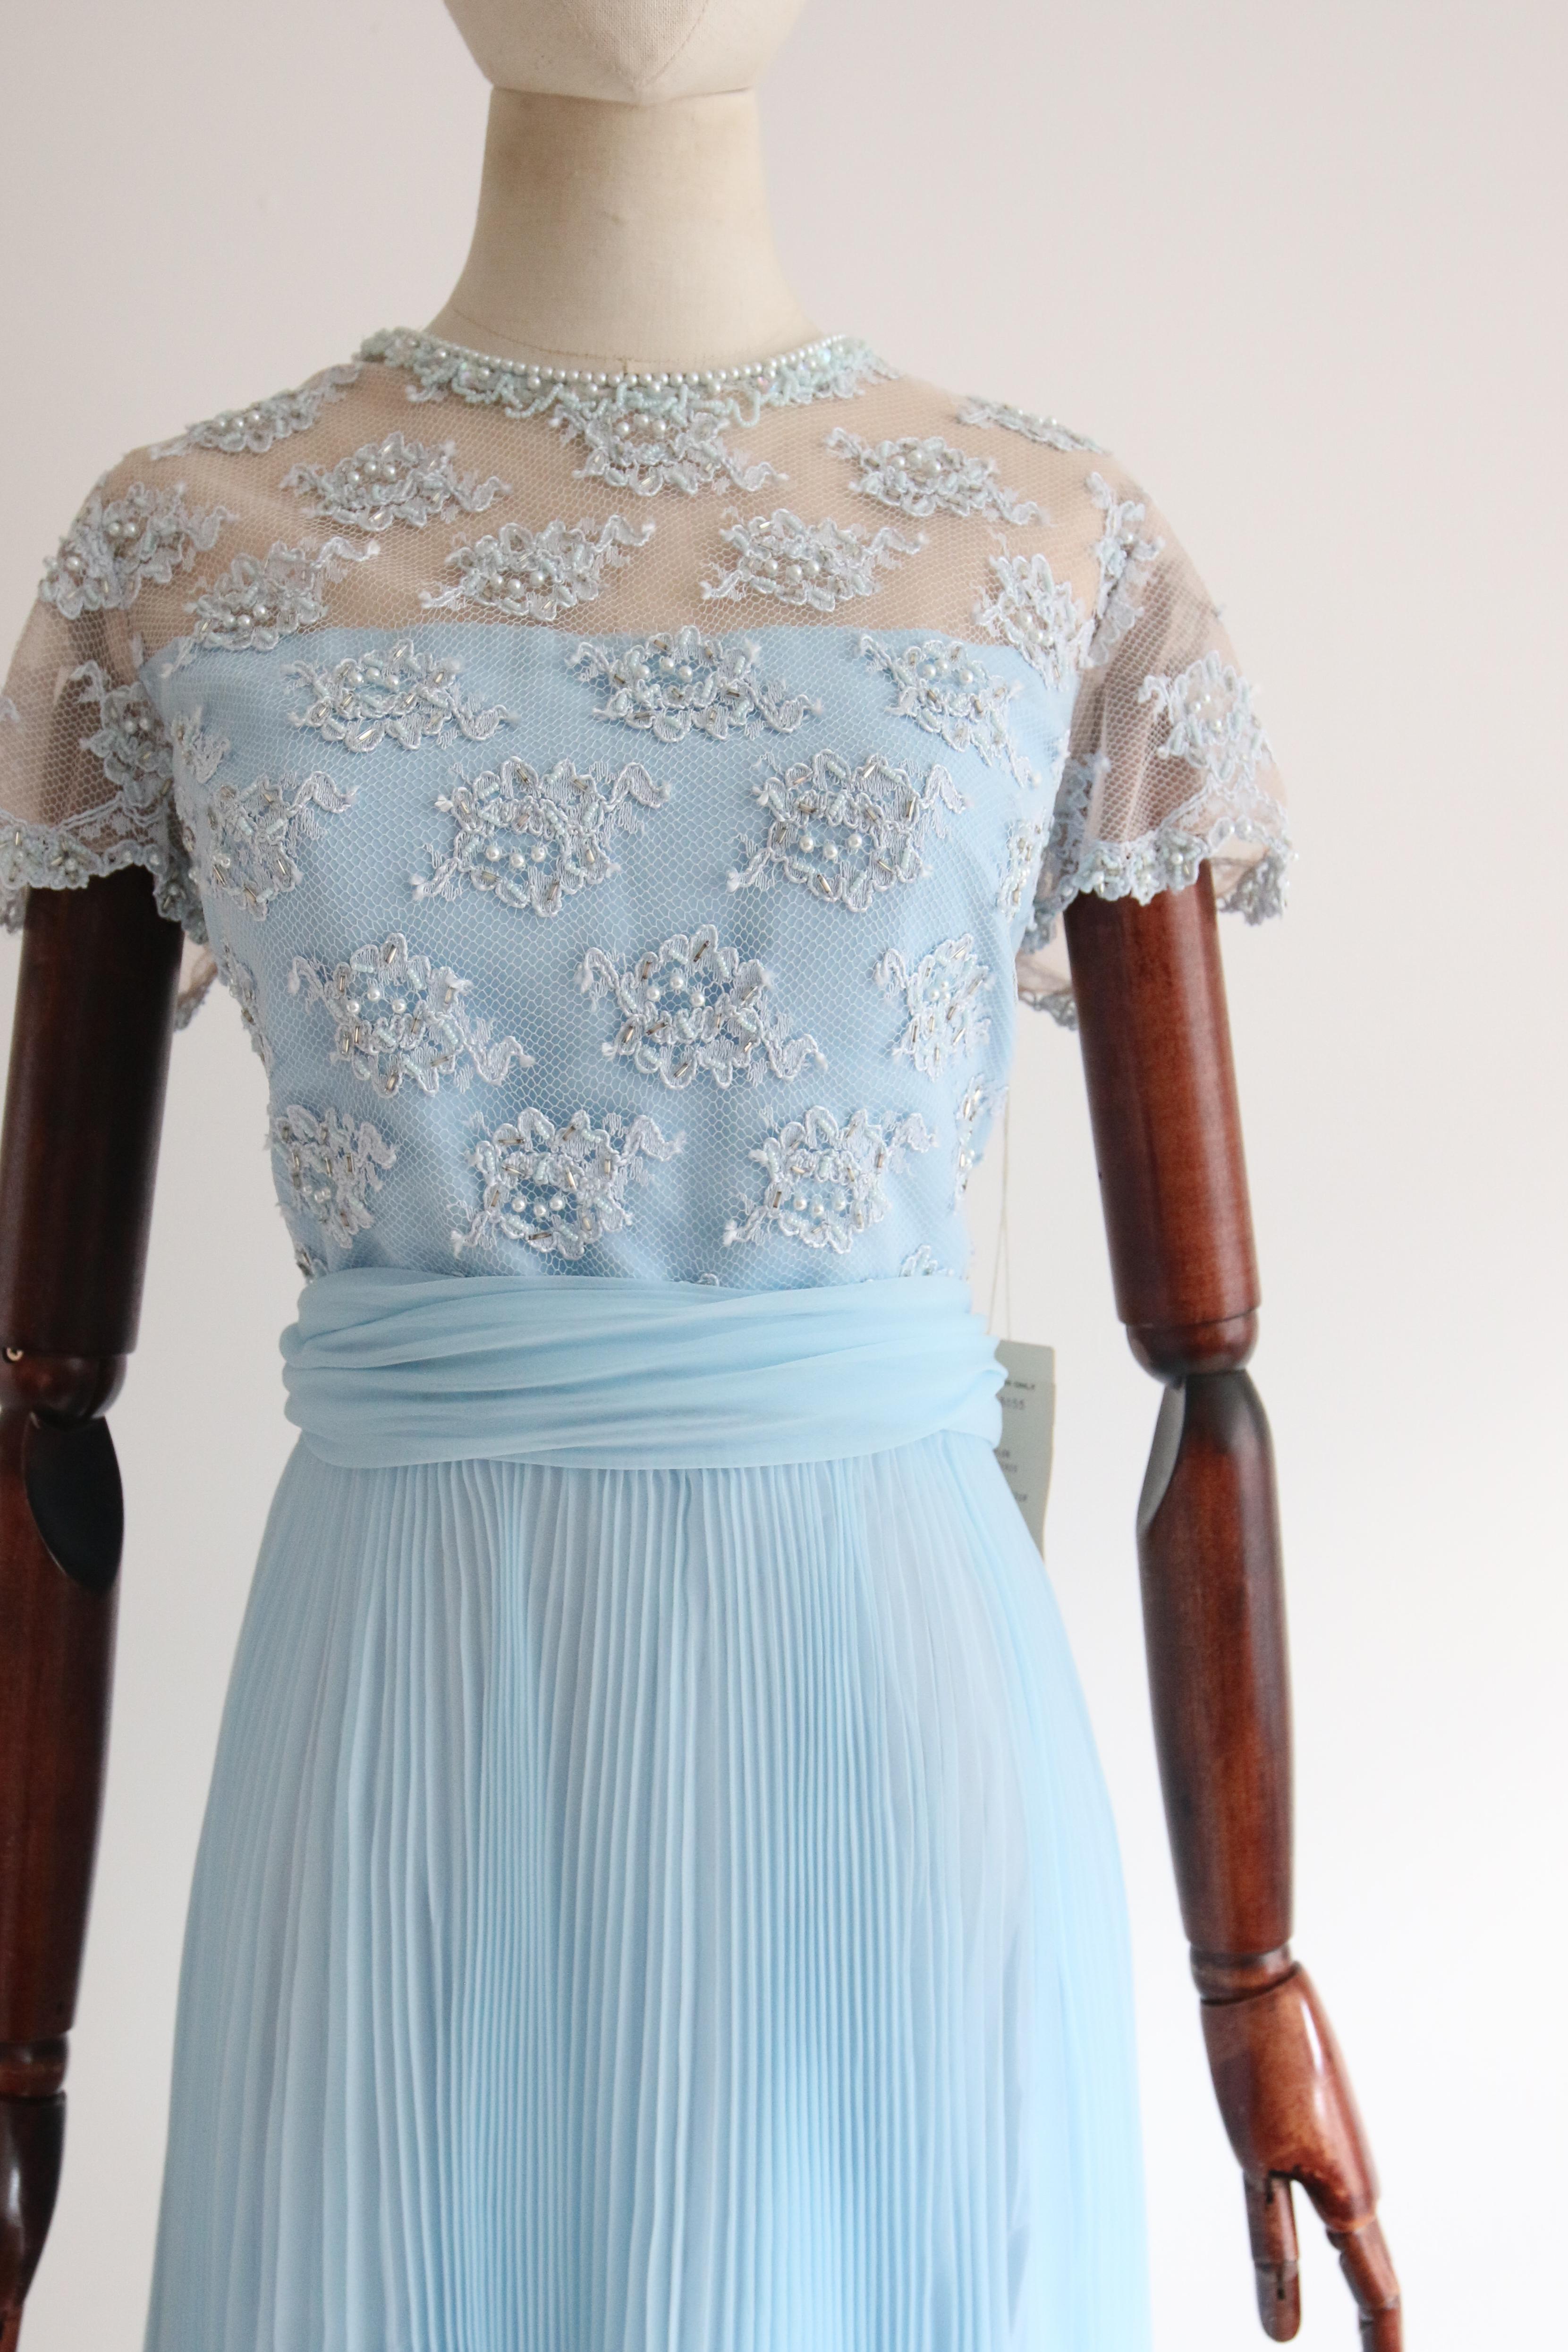 Vintage 1960's Ice Blue Chiffon and Lace Pleated Dress UK 12 US 8 In Good Condition For Sale In Cheltenham, GB